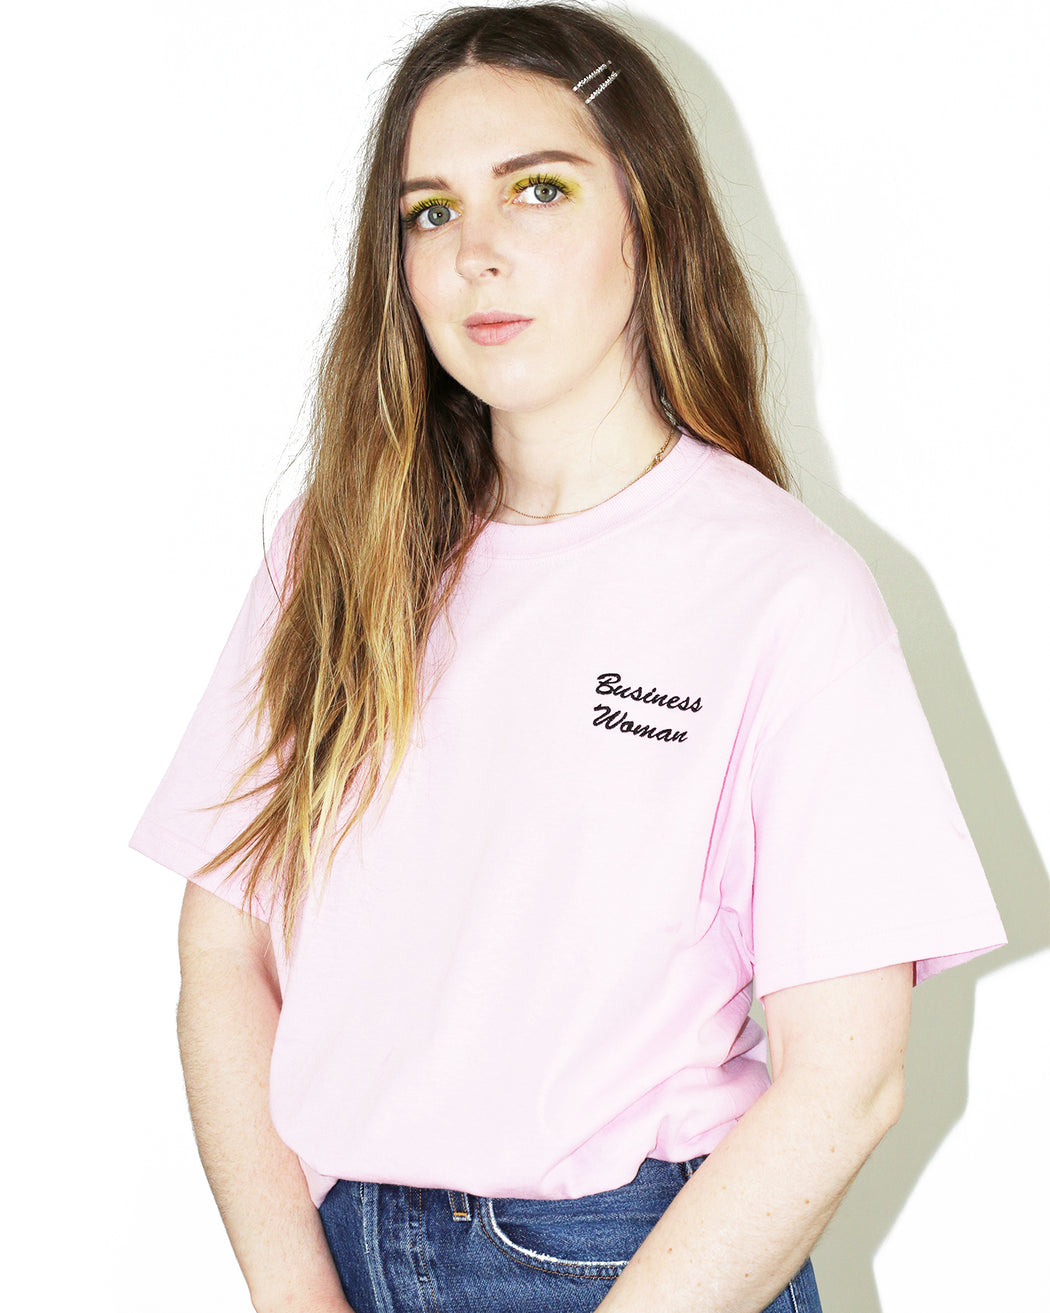 Double Trouble Gang:Business Woman Tee – Black on Pink Embroidery,ANOMIE